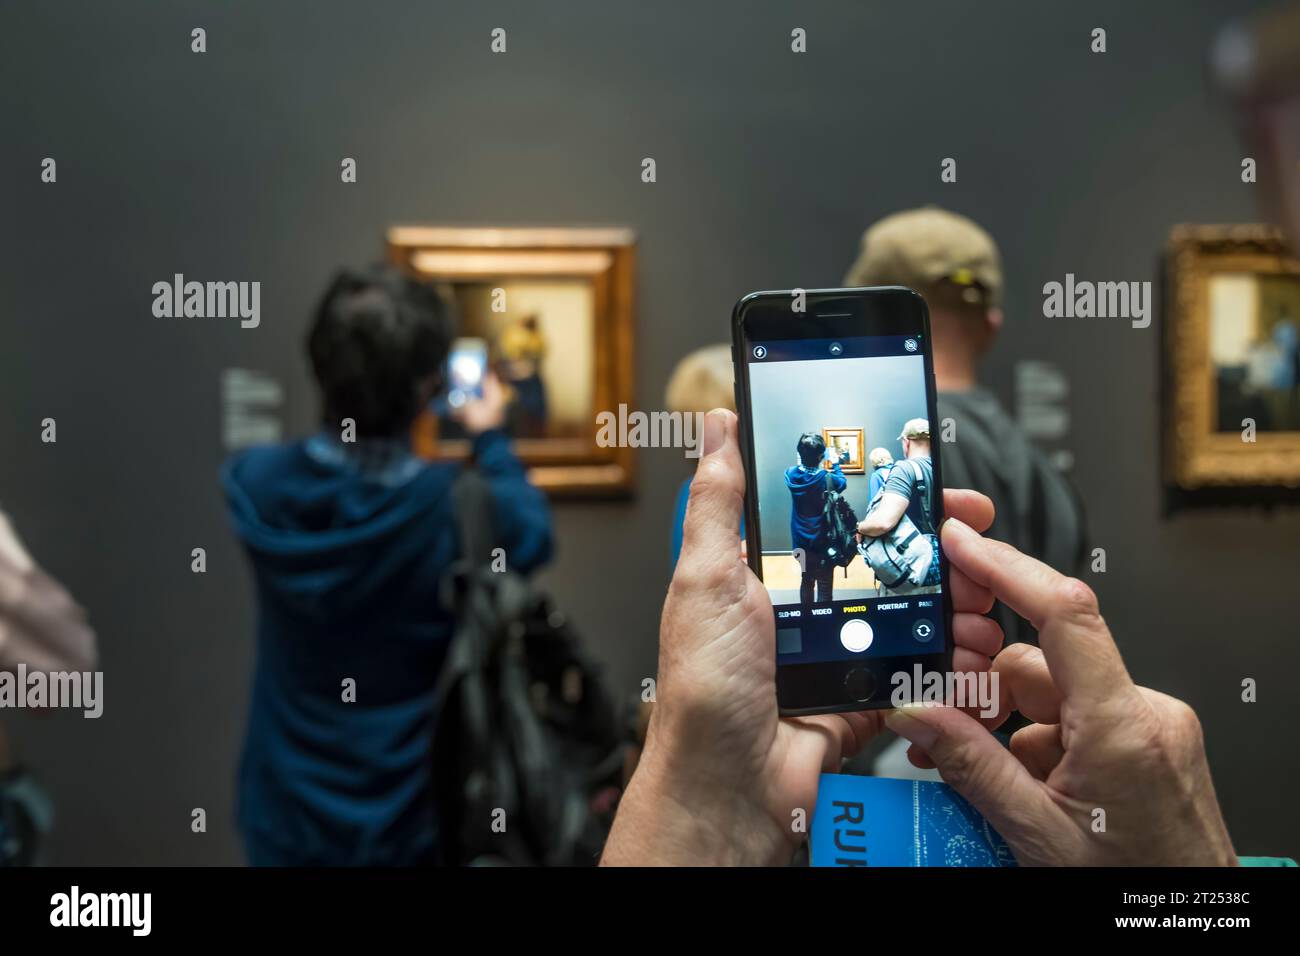 People photographing The Milkmaid by Vermeer from c. 1660 using mobile 'phones in the Rijksmuseum, Amsterdam. Stock Photo